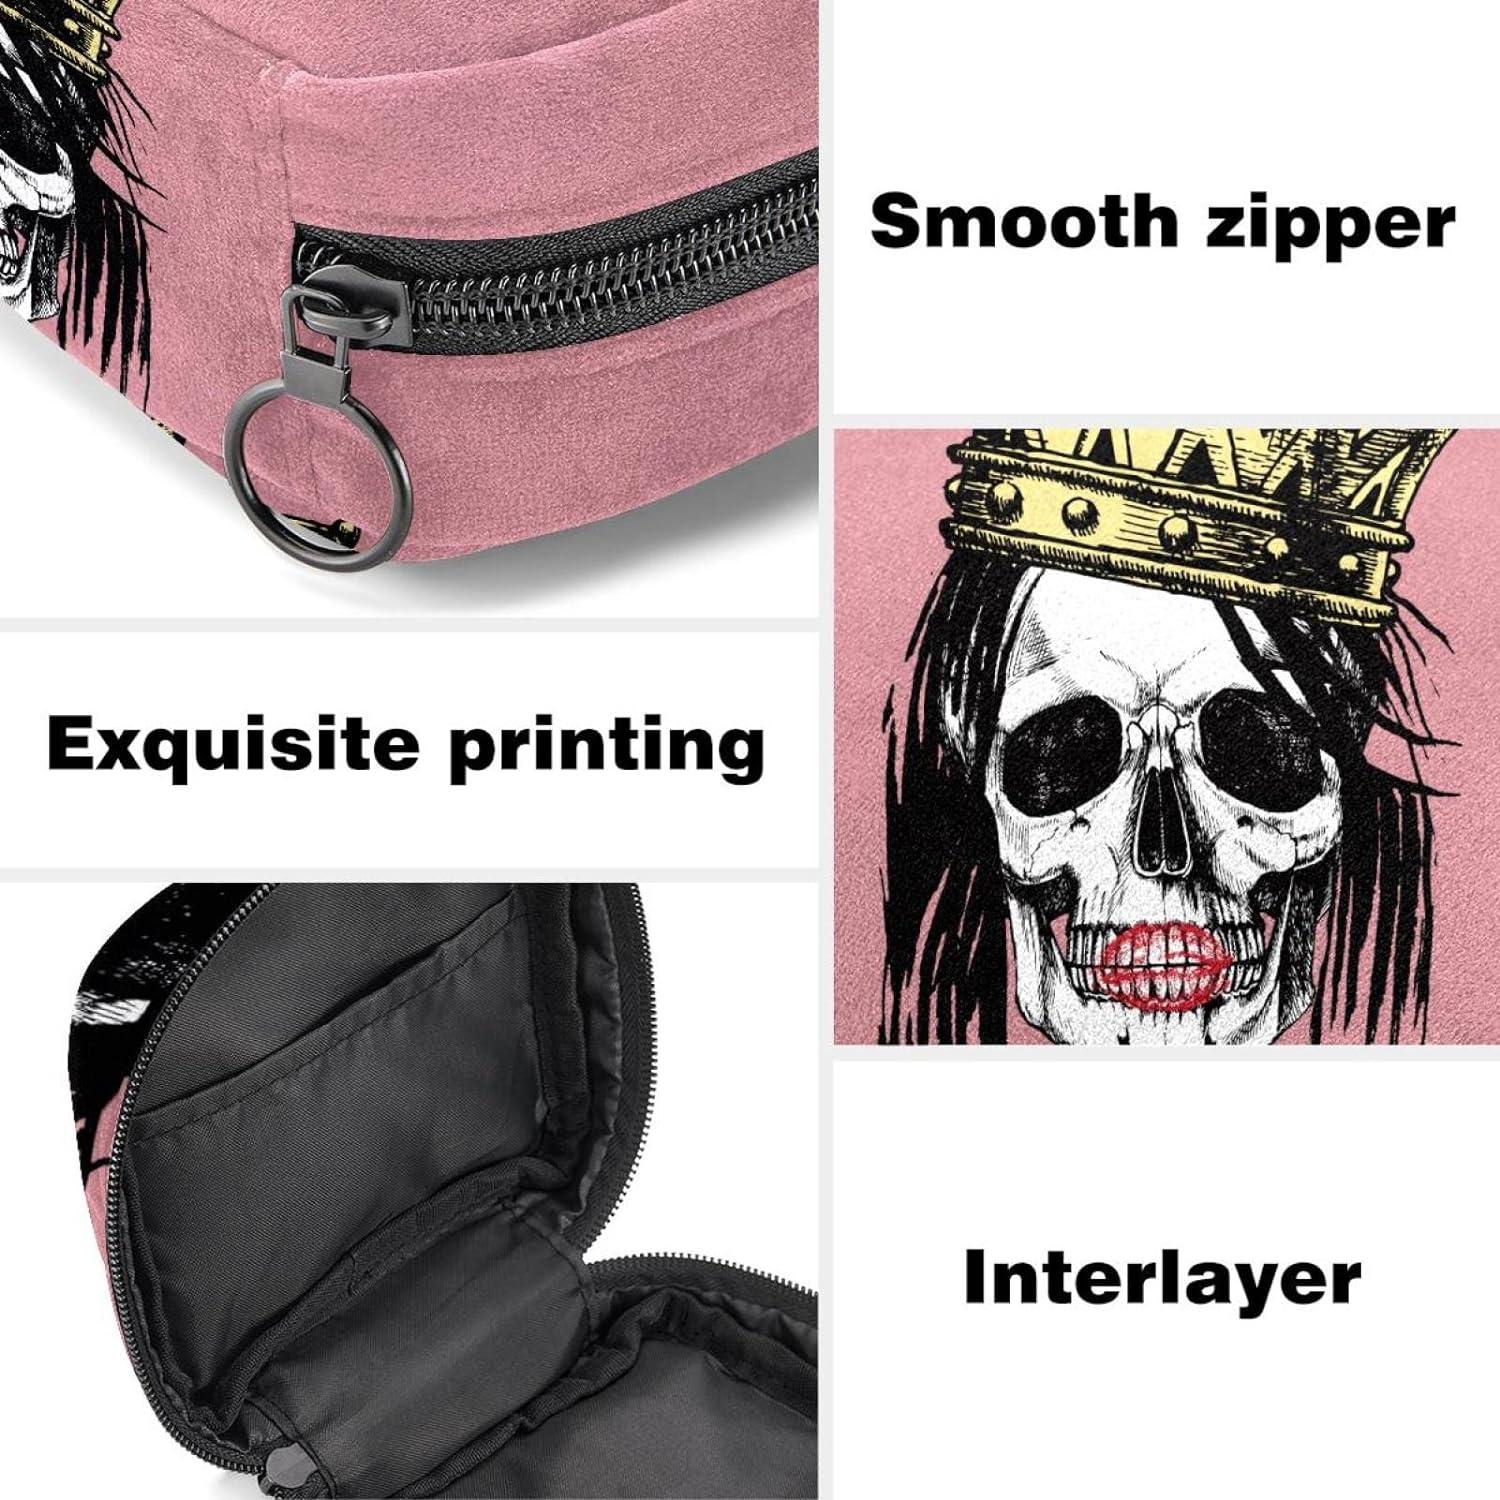 Skull Period Pouch Portable Tampon Storage Bag for Sanitary Napkins Tampon  Holder for Purse Feminine Product Organizer First Period Gifts for Teen  Girls School Multicoloured 05